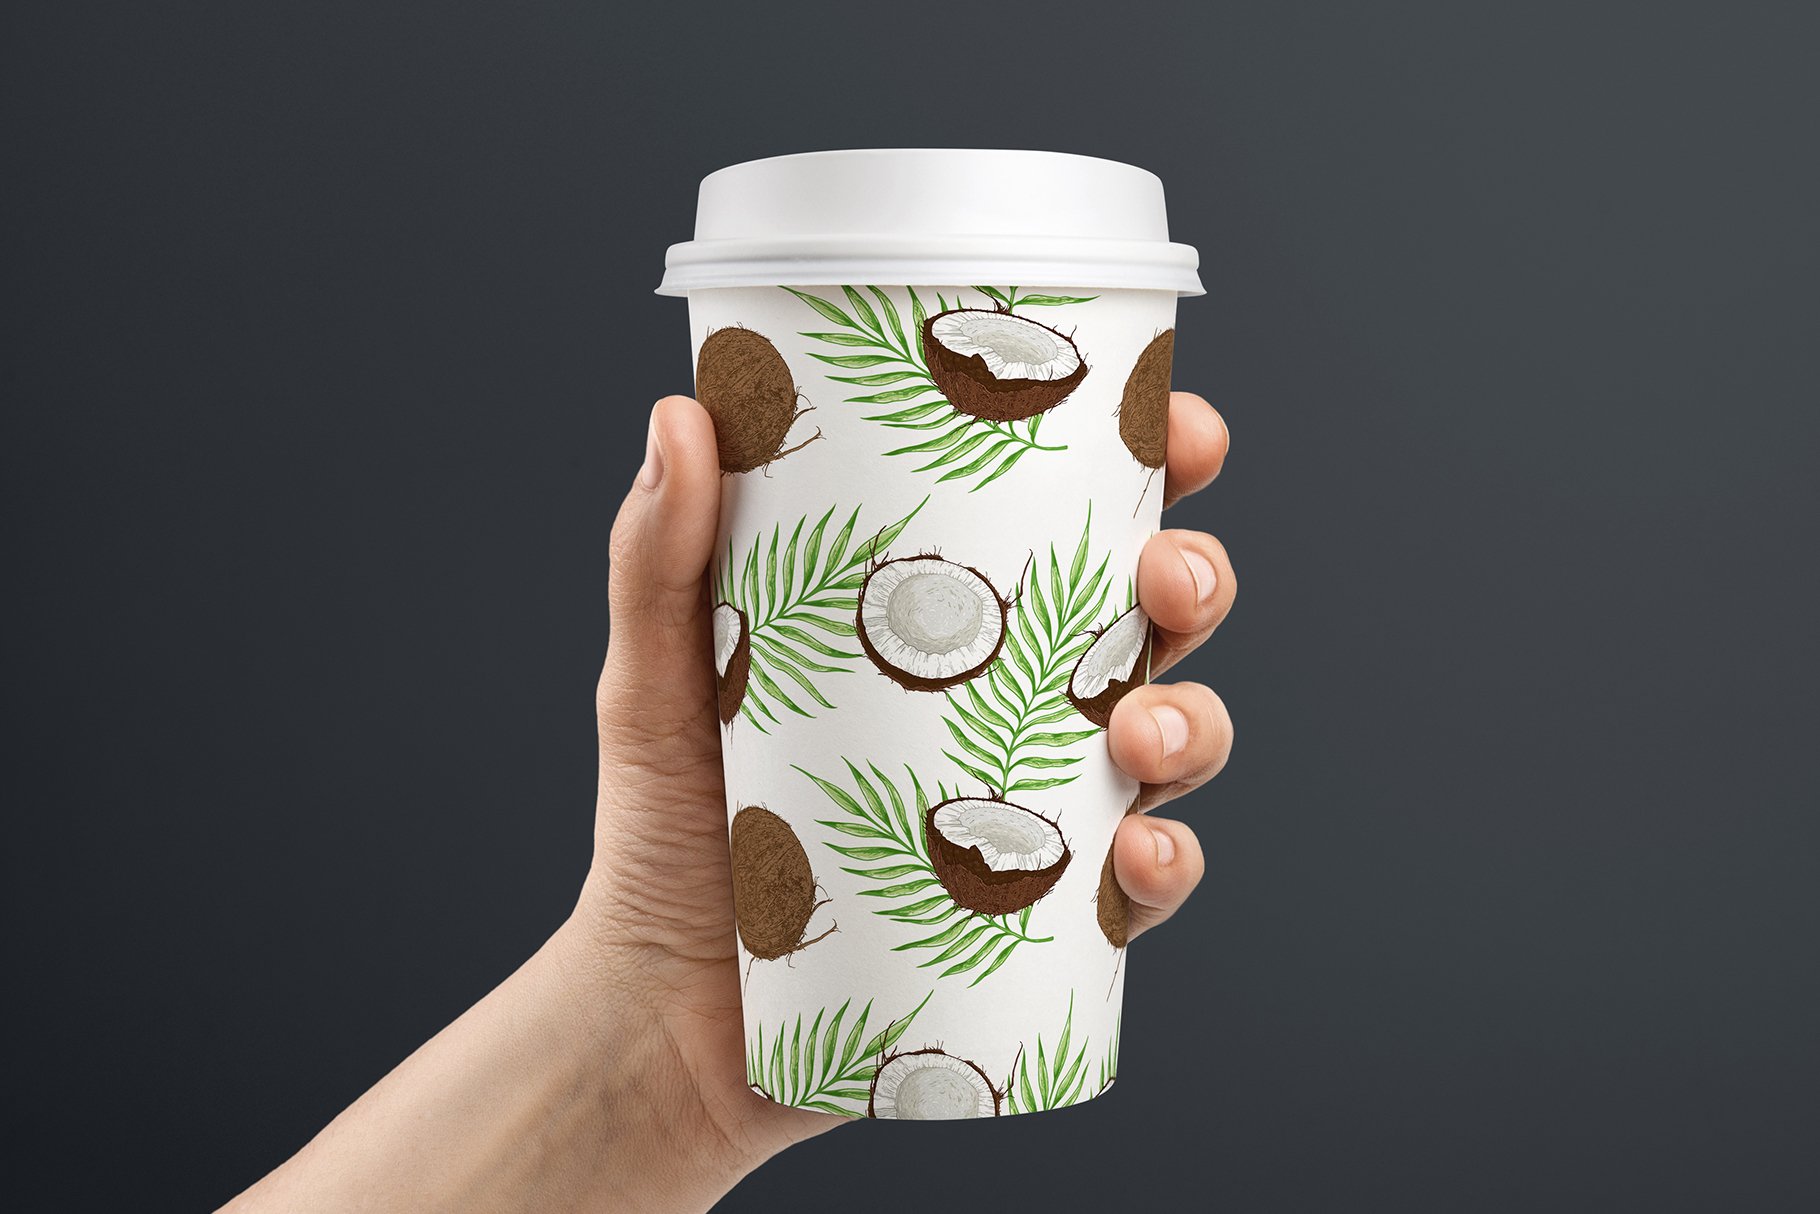 Big paper cup with coconut illustration.